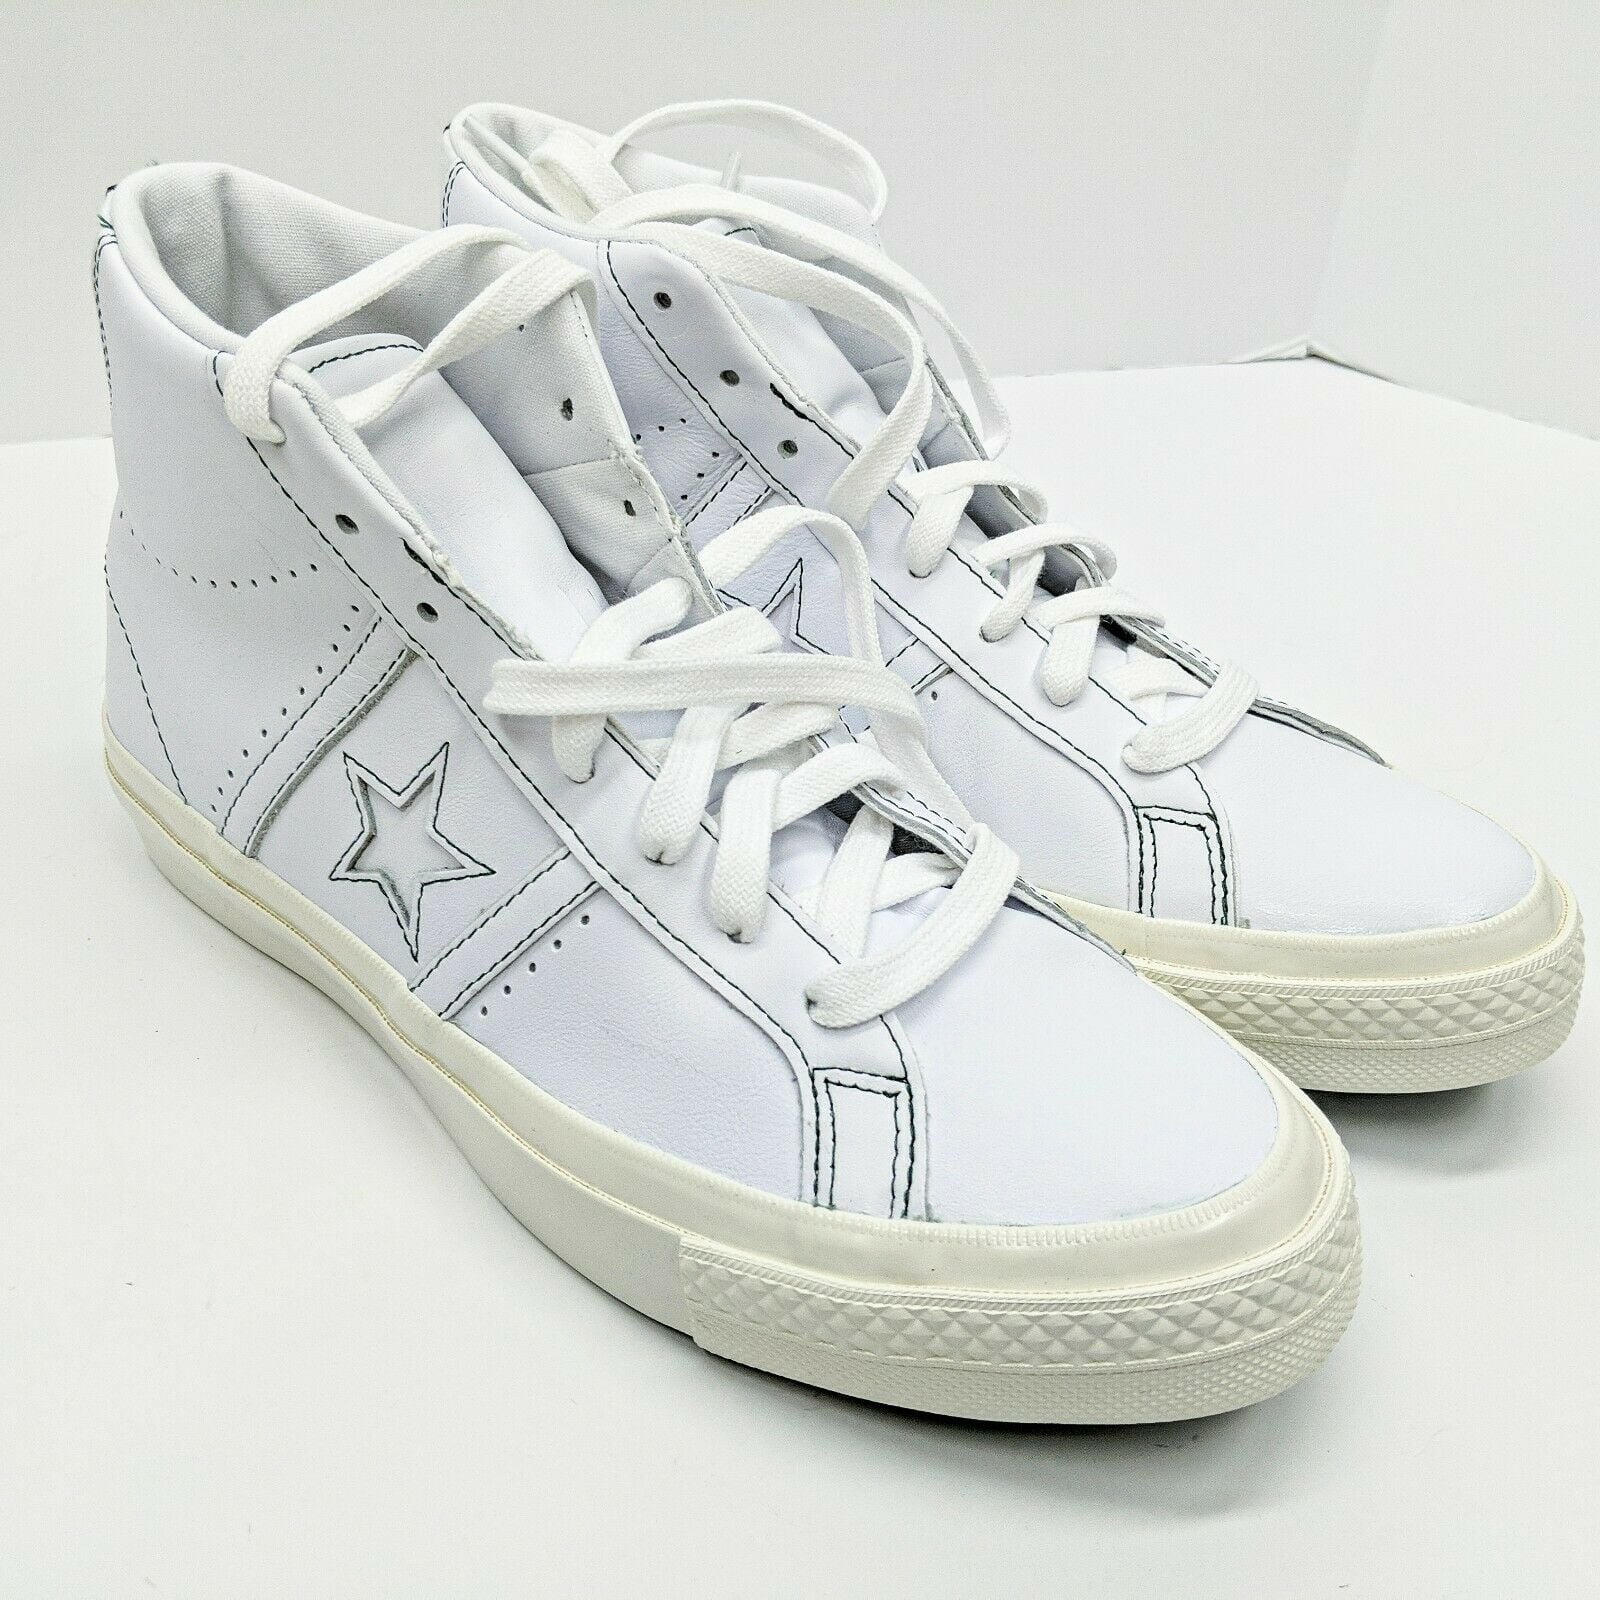 Converse One Star Academy Hi Men's Leather Limited Edition Sneaker Shoe ...